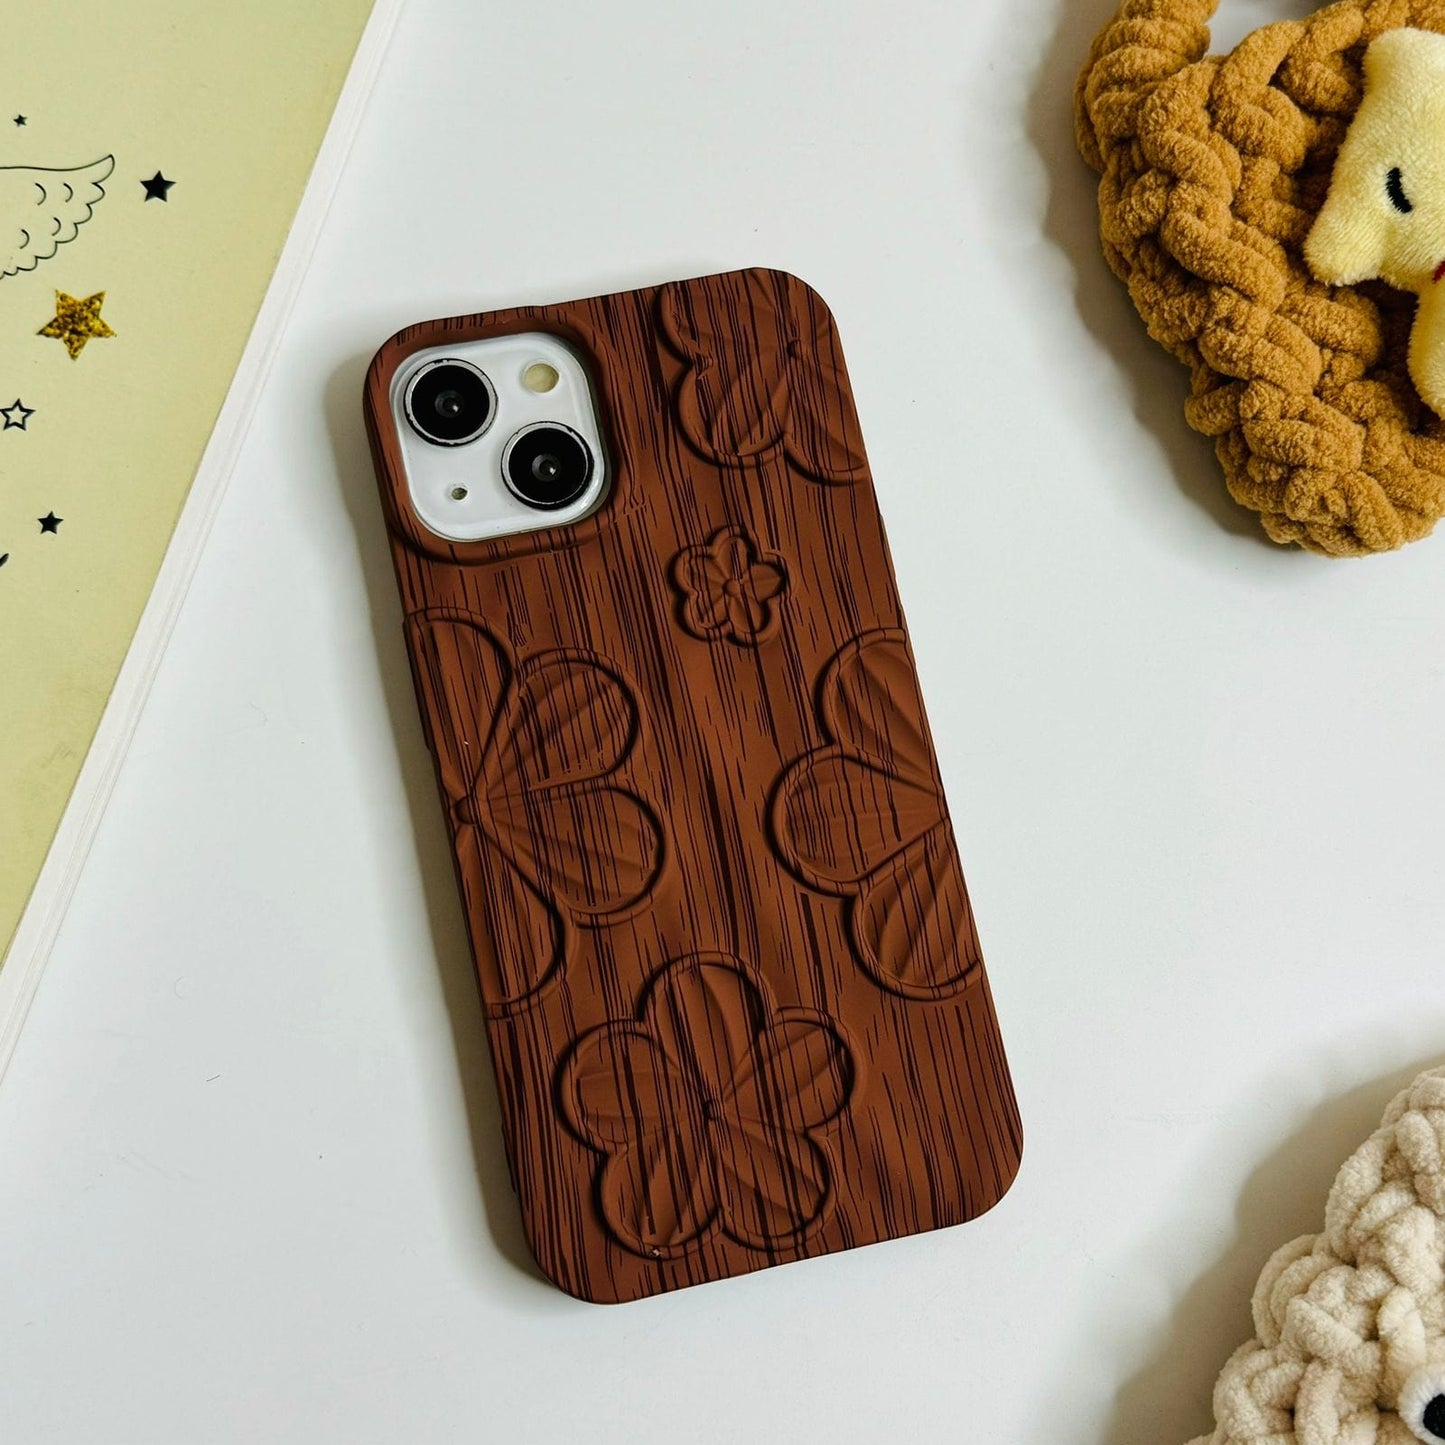 Wooden Floral Case For Iphone Users